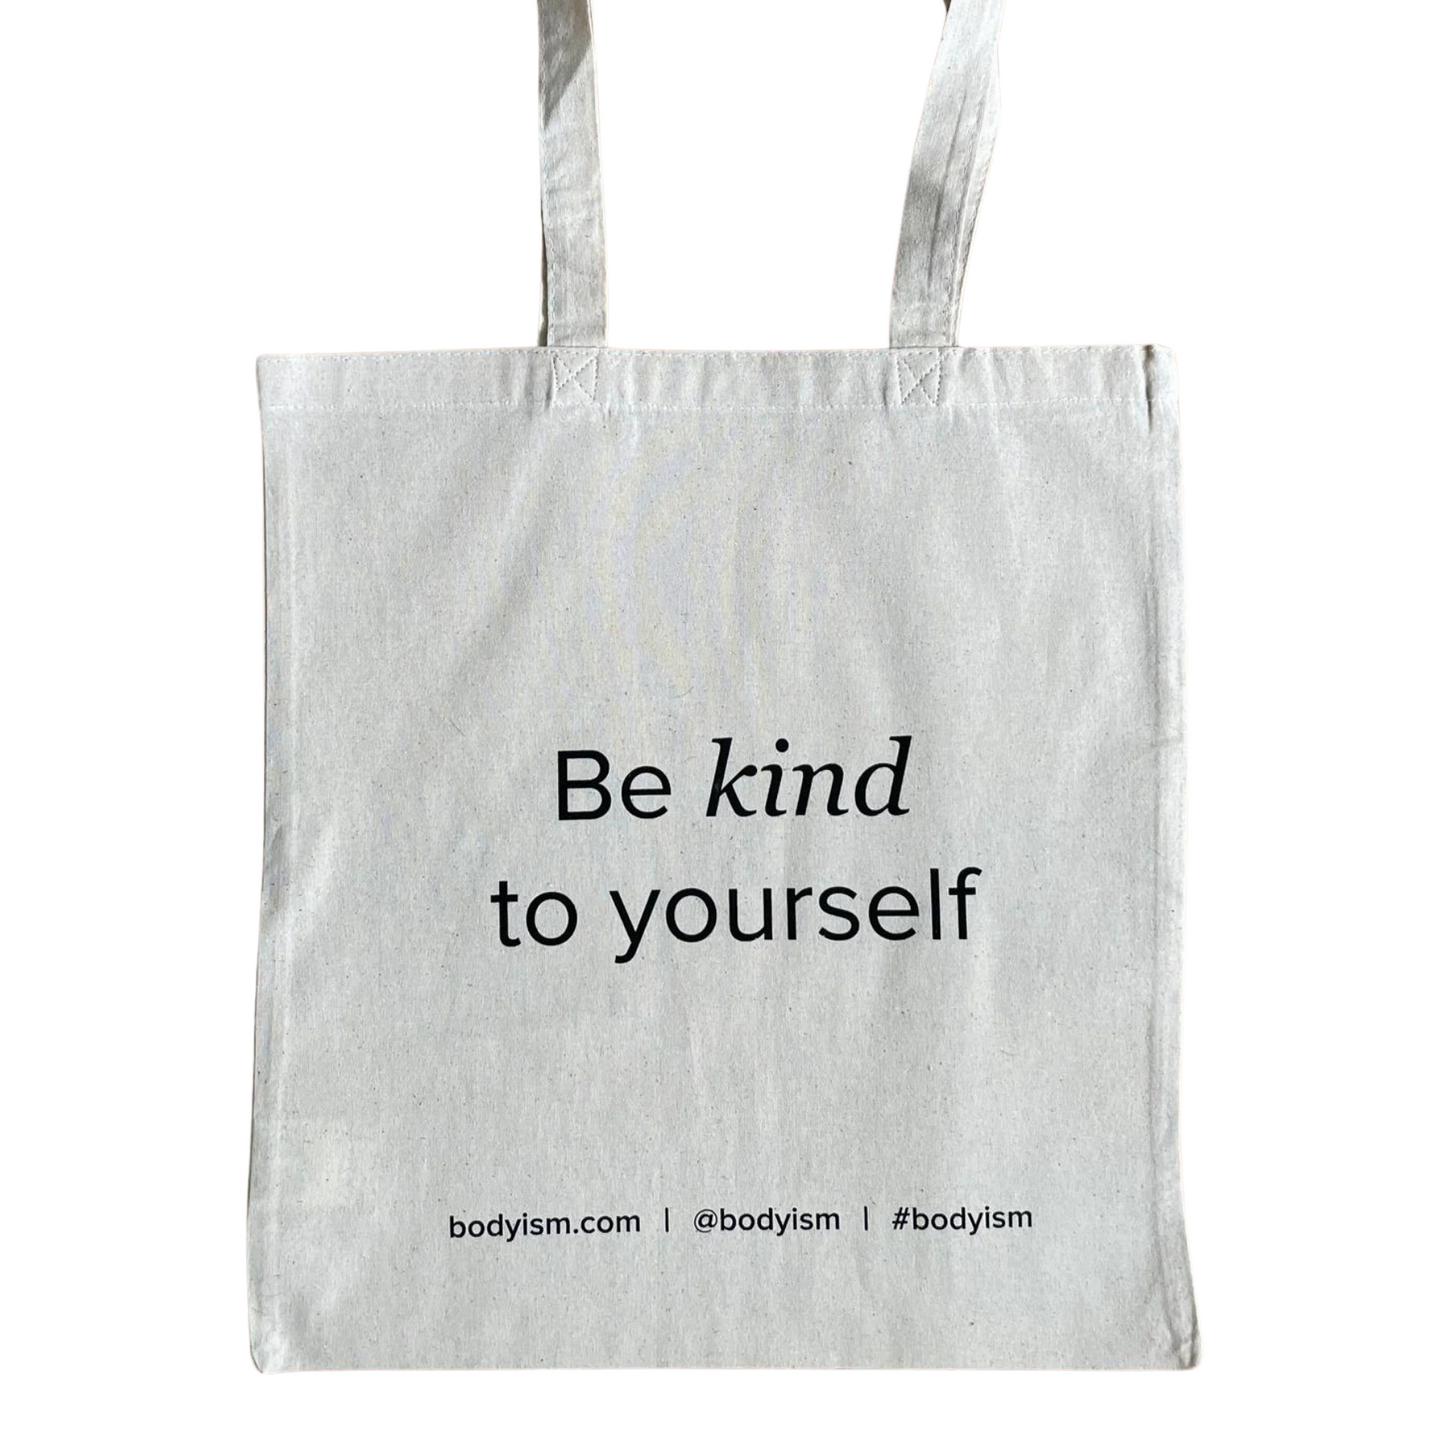 Bodyism Tote Bag